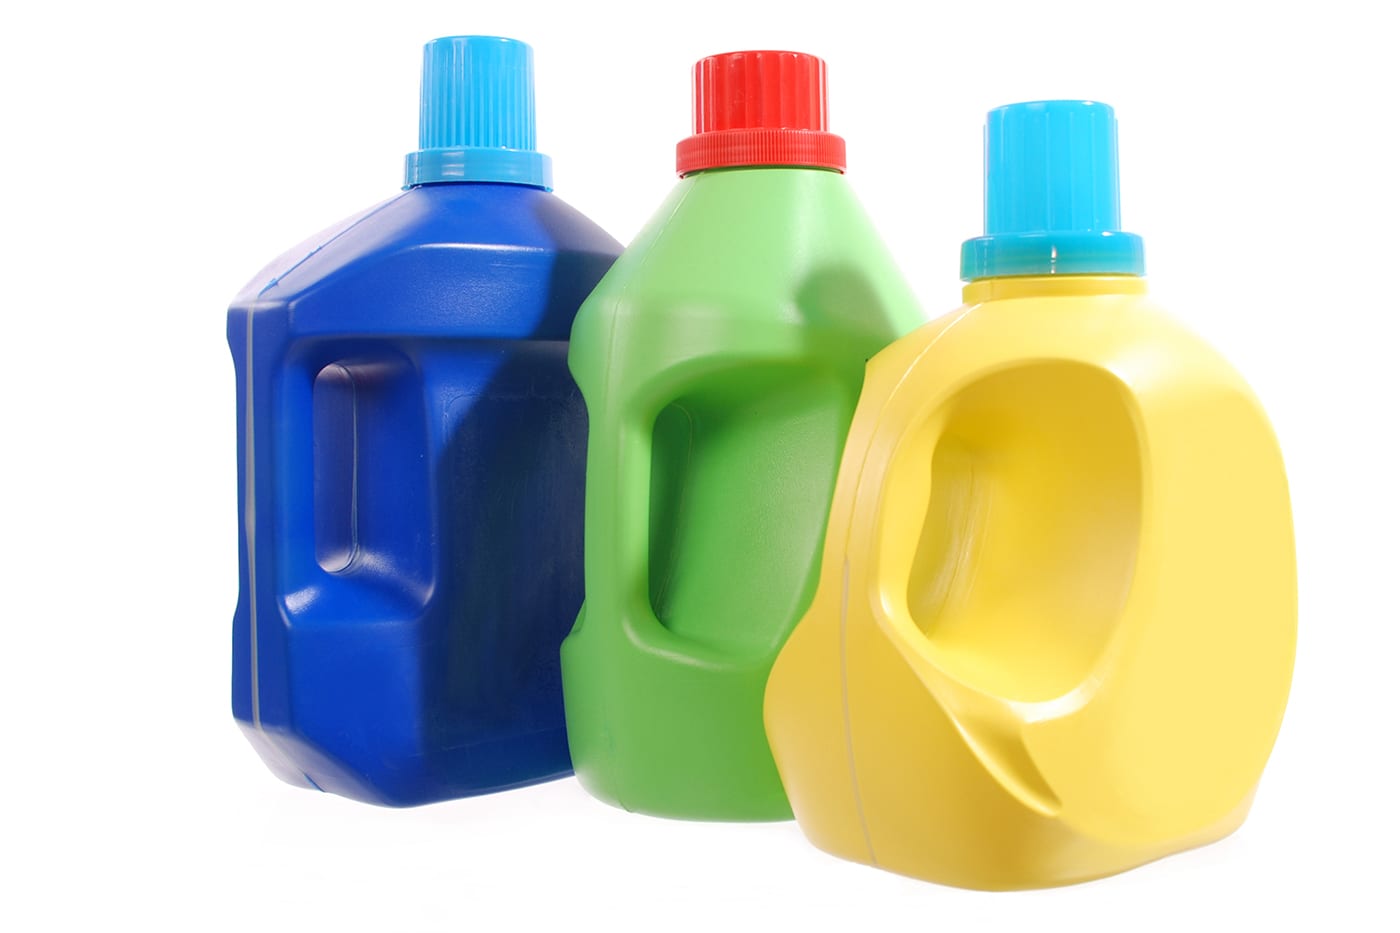 7 Fun Uses for Empty Laundry Detergent Bottles